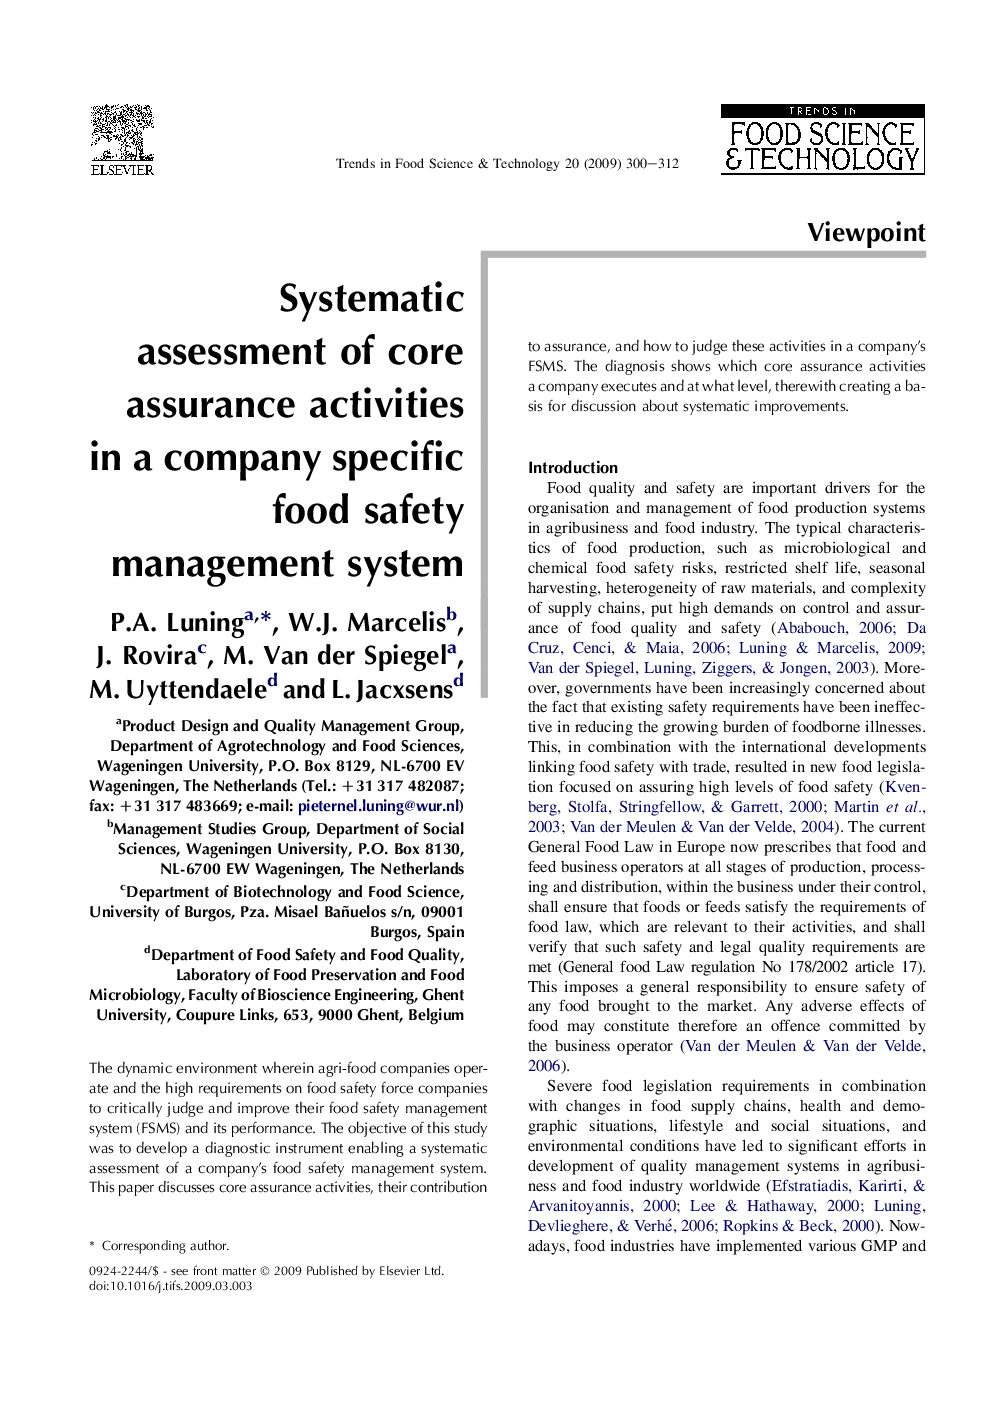 Systematic assessment of core assurance activities in a company specific food safety management system